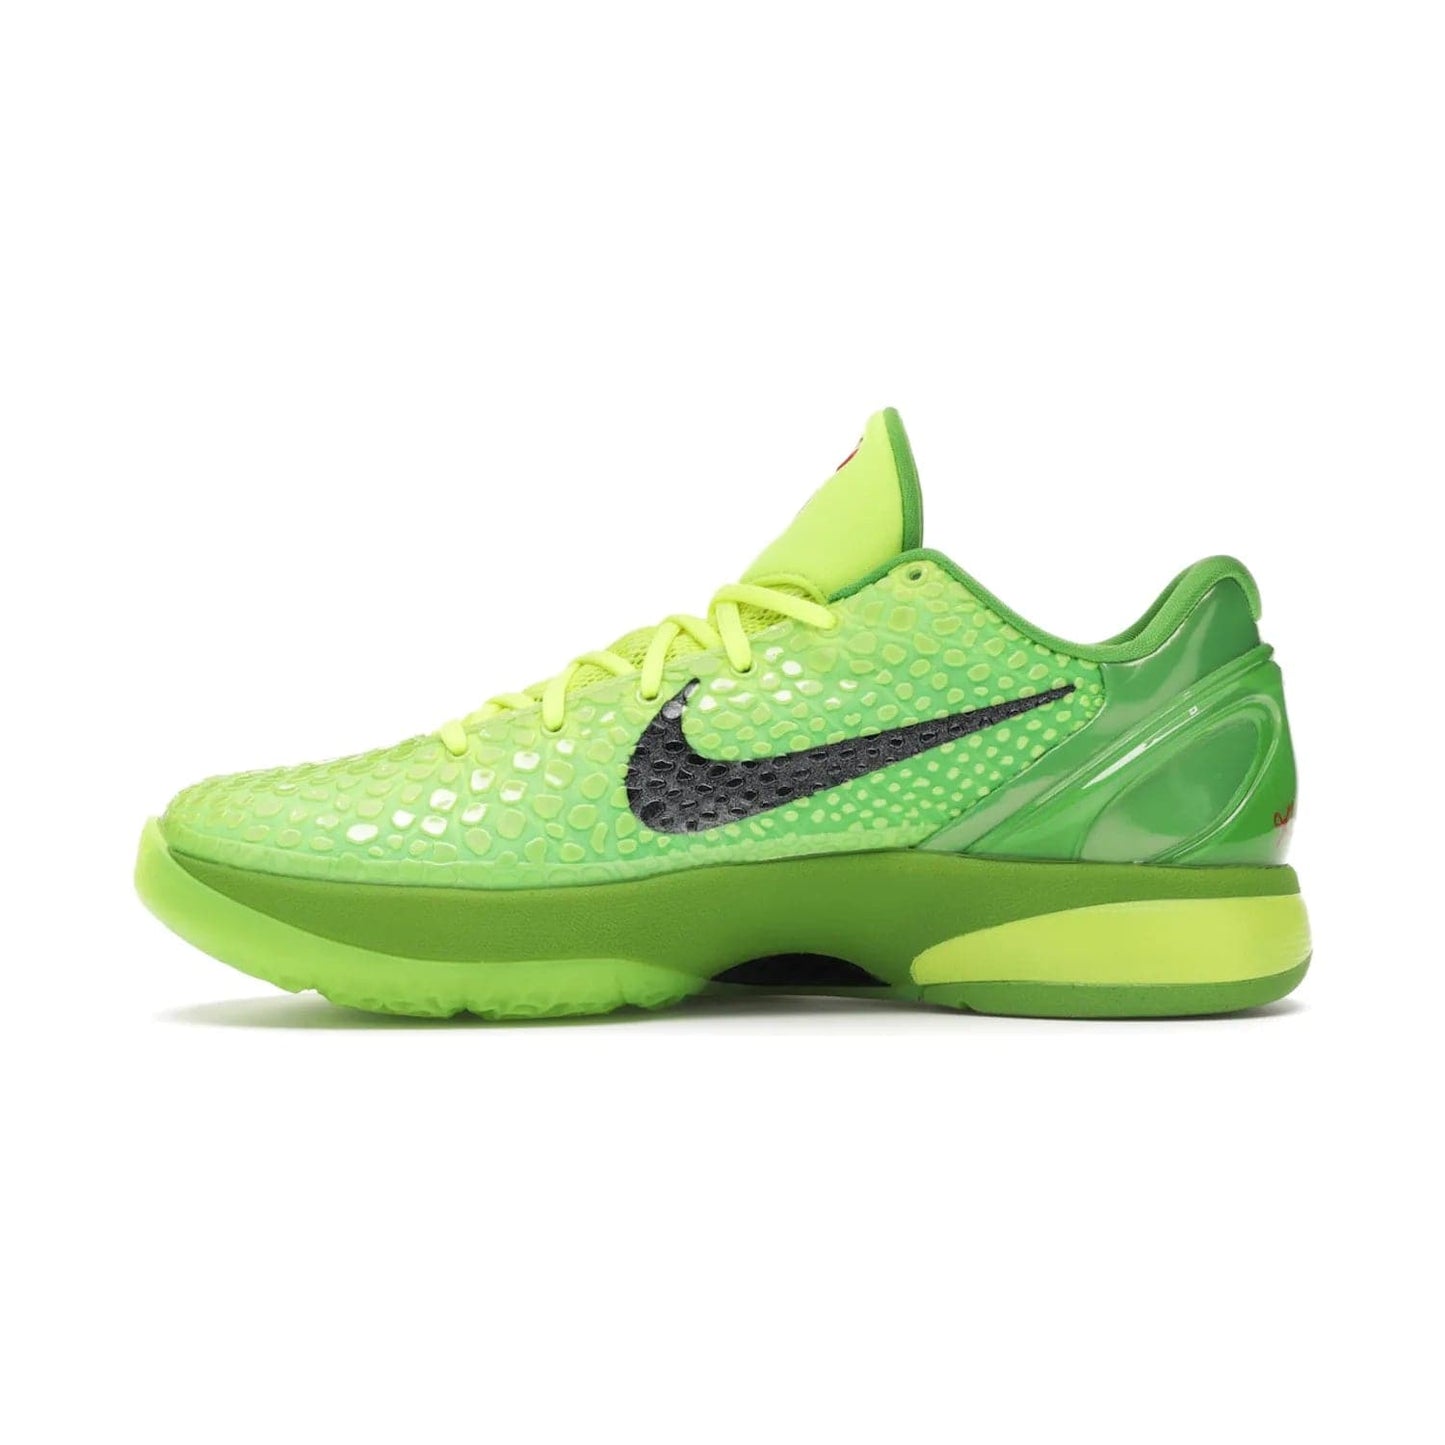 Nike Kobe 6 Protro Grinch (2020) - Image 19 - Only at www.BallersClubKickz.com - #
The Nike Kobe 6 Protro Grinch updates the iconic 2011 design with modern tech like a Zoom Air cushioning system, scaled-down traction, and updated silhouette. Experience the textured Green Apple and Volt upper plus bright red and green accents for $180.